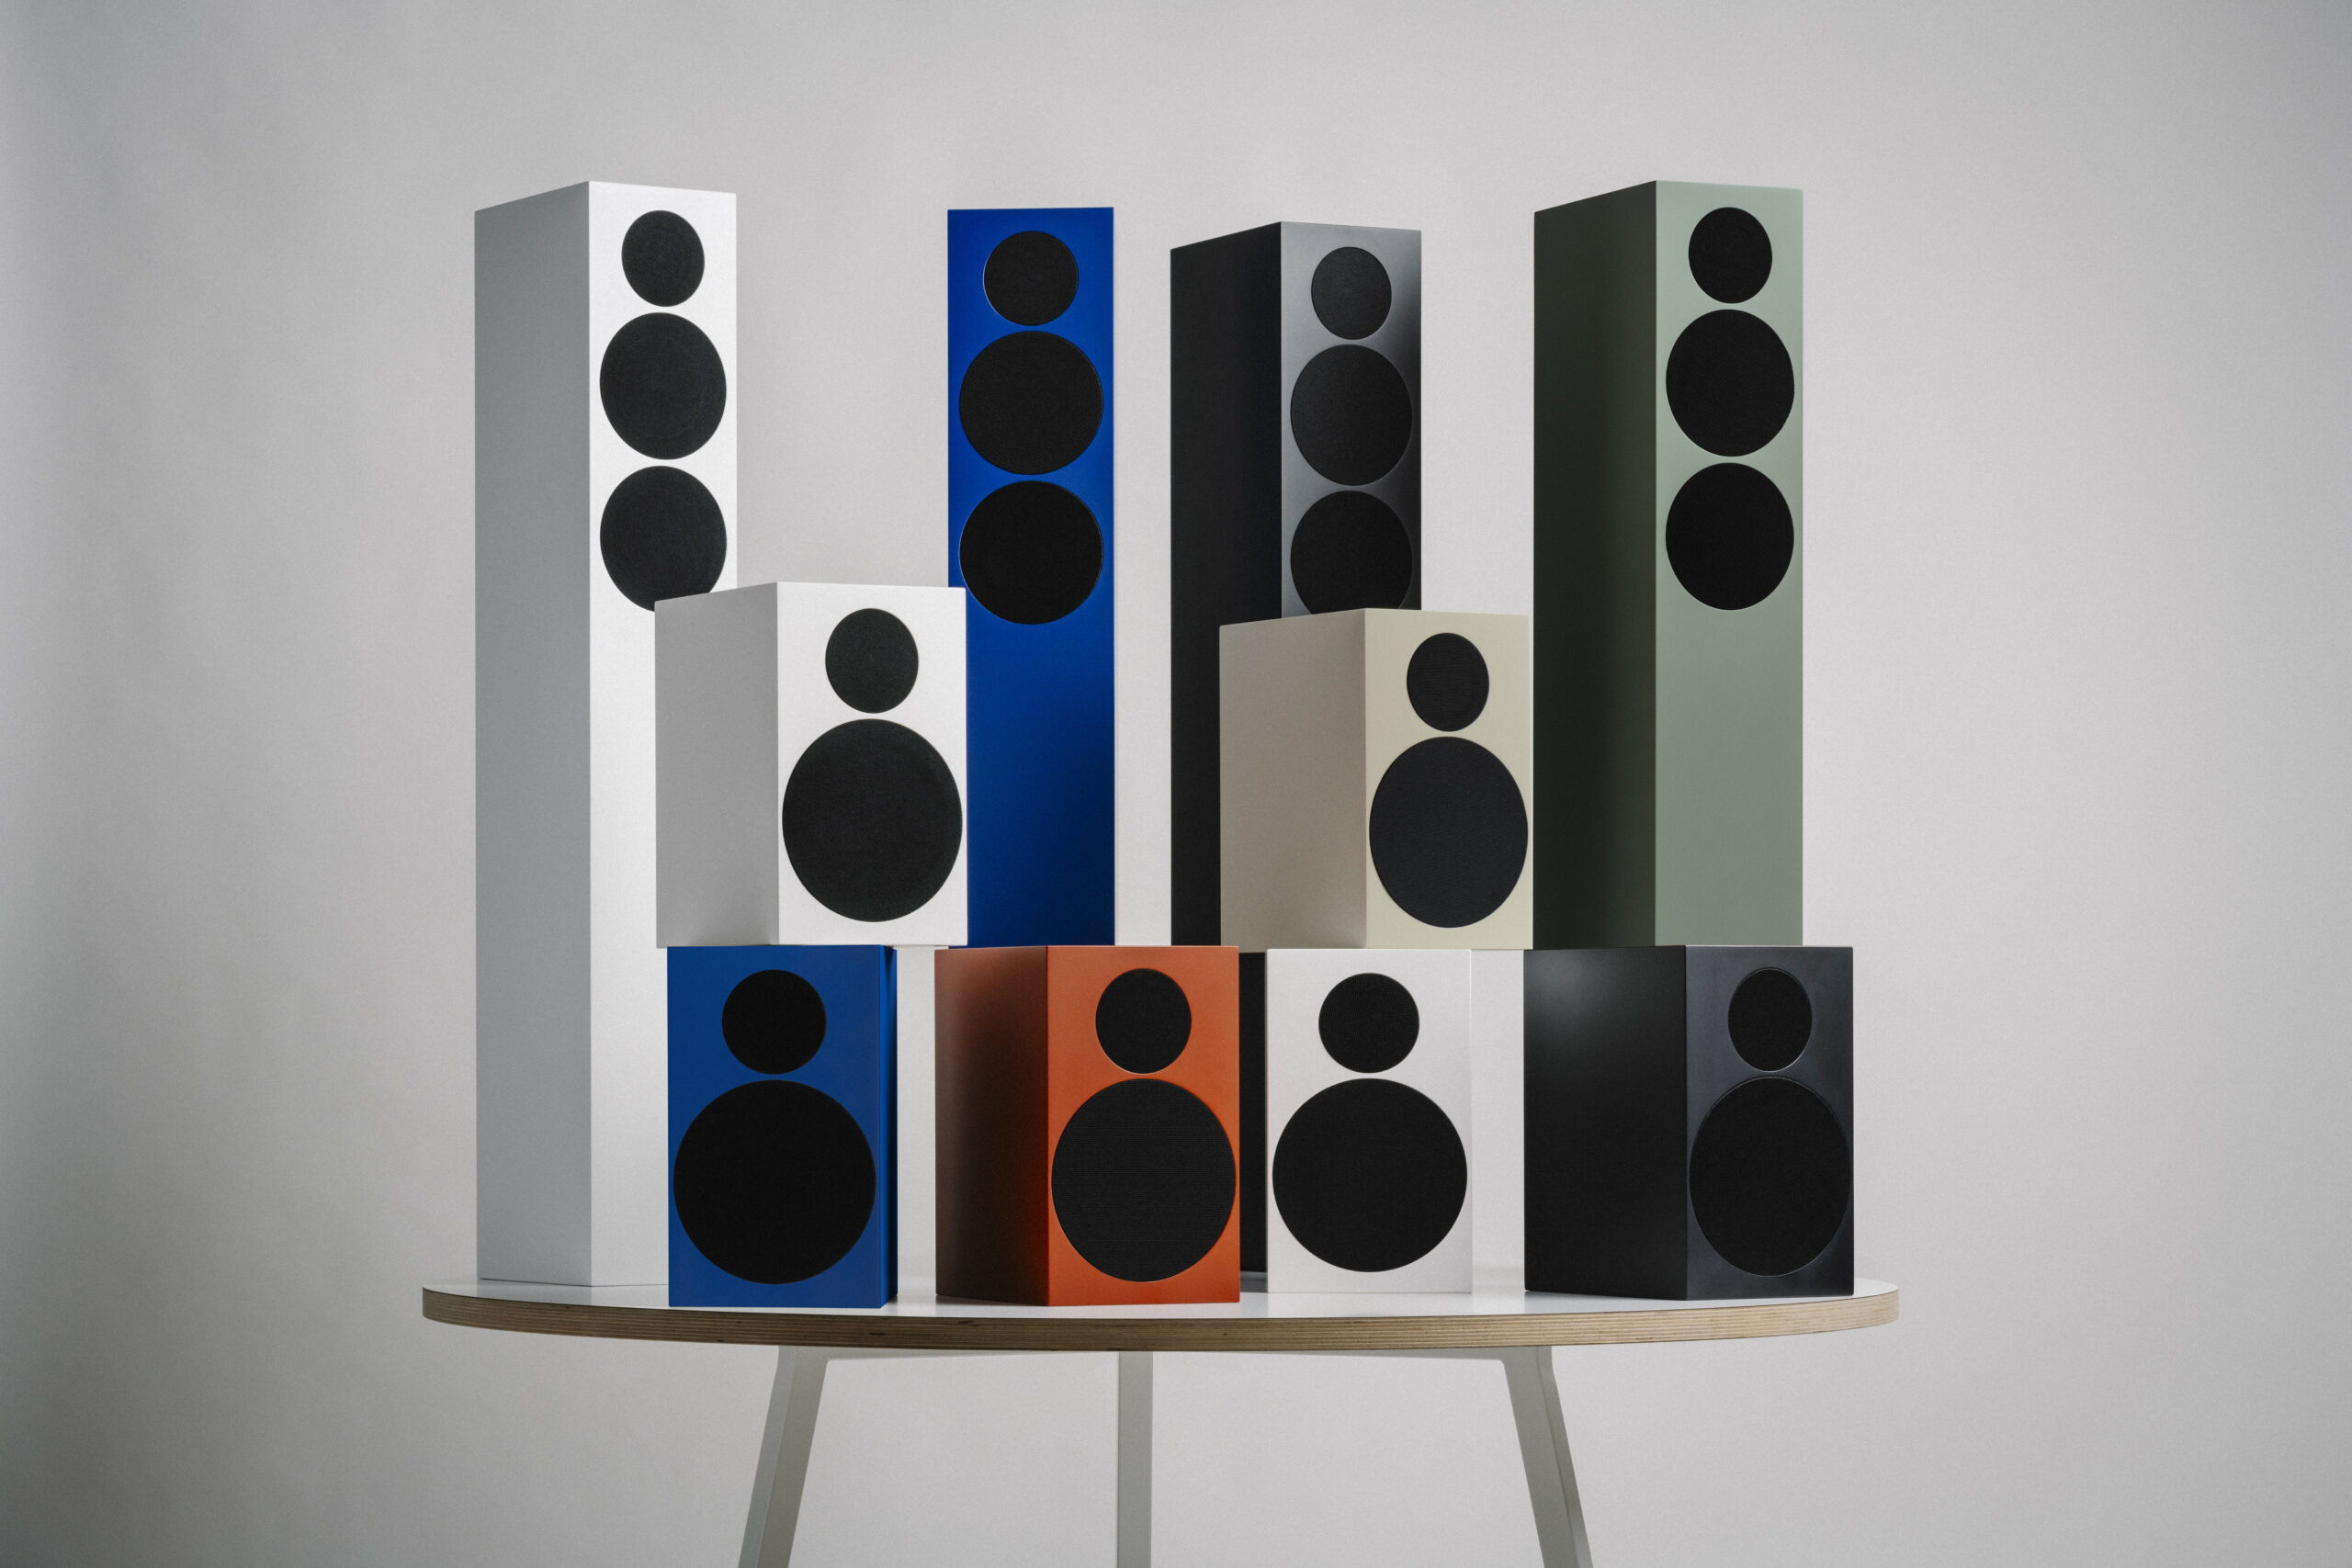 Tone Speaker L and S displayed on a white table in various satin colors